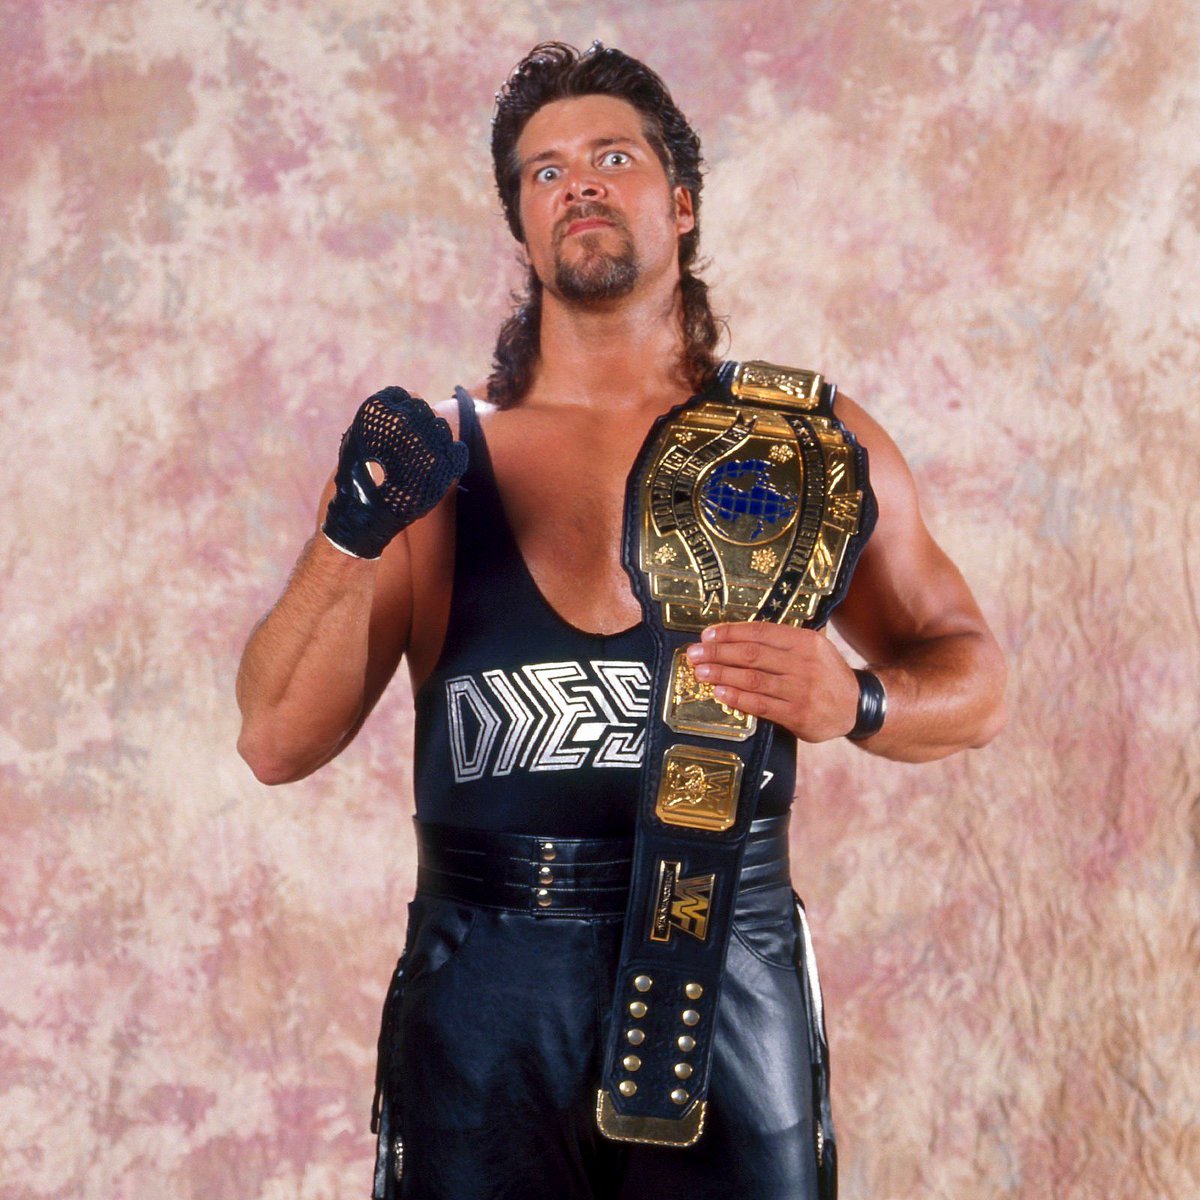 Intercontinental Champion of the day: Diesel - Captured the title on April 13, 1994. His title reign lasted 138 days. 🏆 #WWF #WWE #Wrestling #KevinNash #Diesel